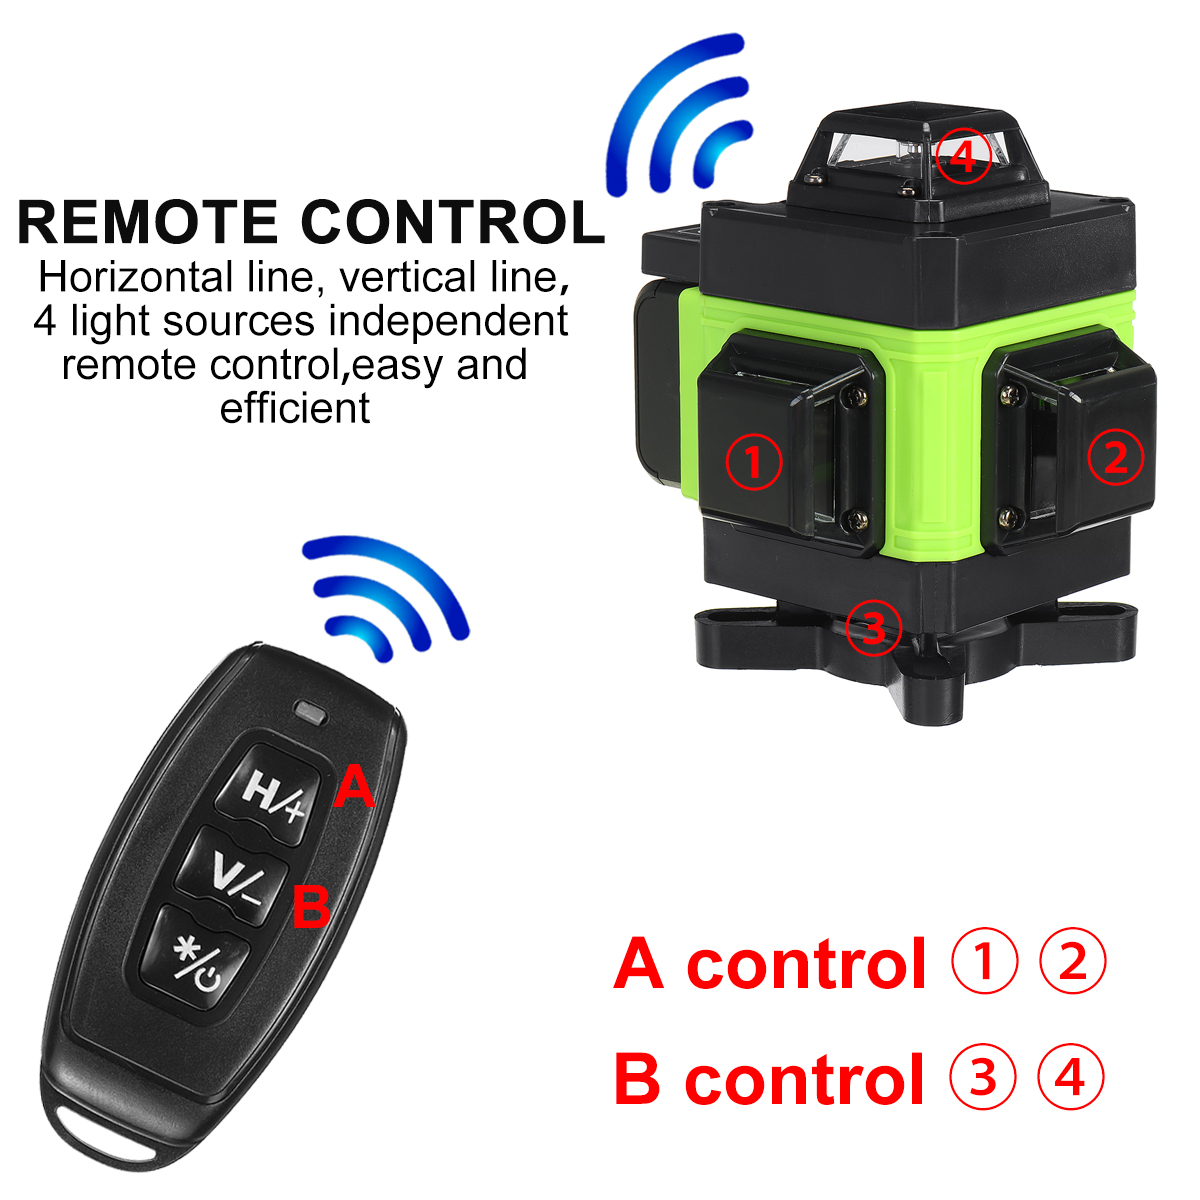 16-Lines-Laser-Level-3D-Green-Horizontal-Vertical-Line-Laser-Auto-Self-Leveling-Remote-Control-Indoo-1906144-2